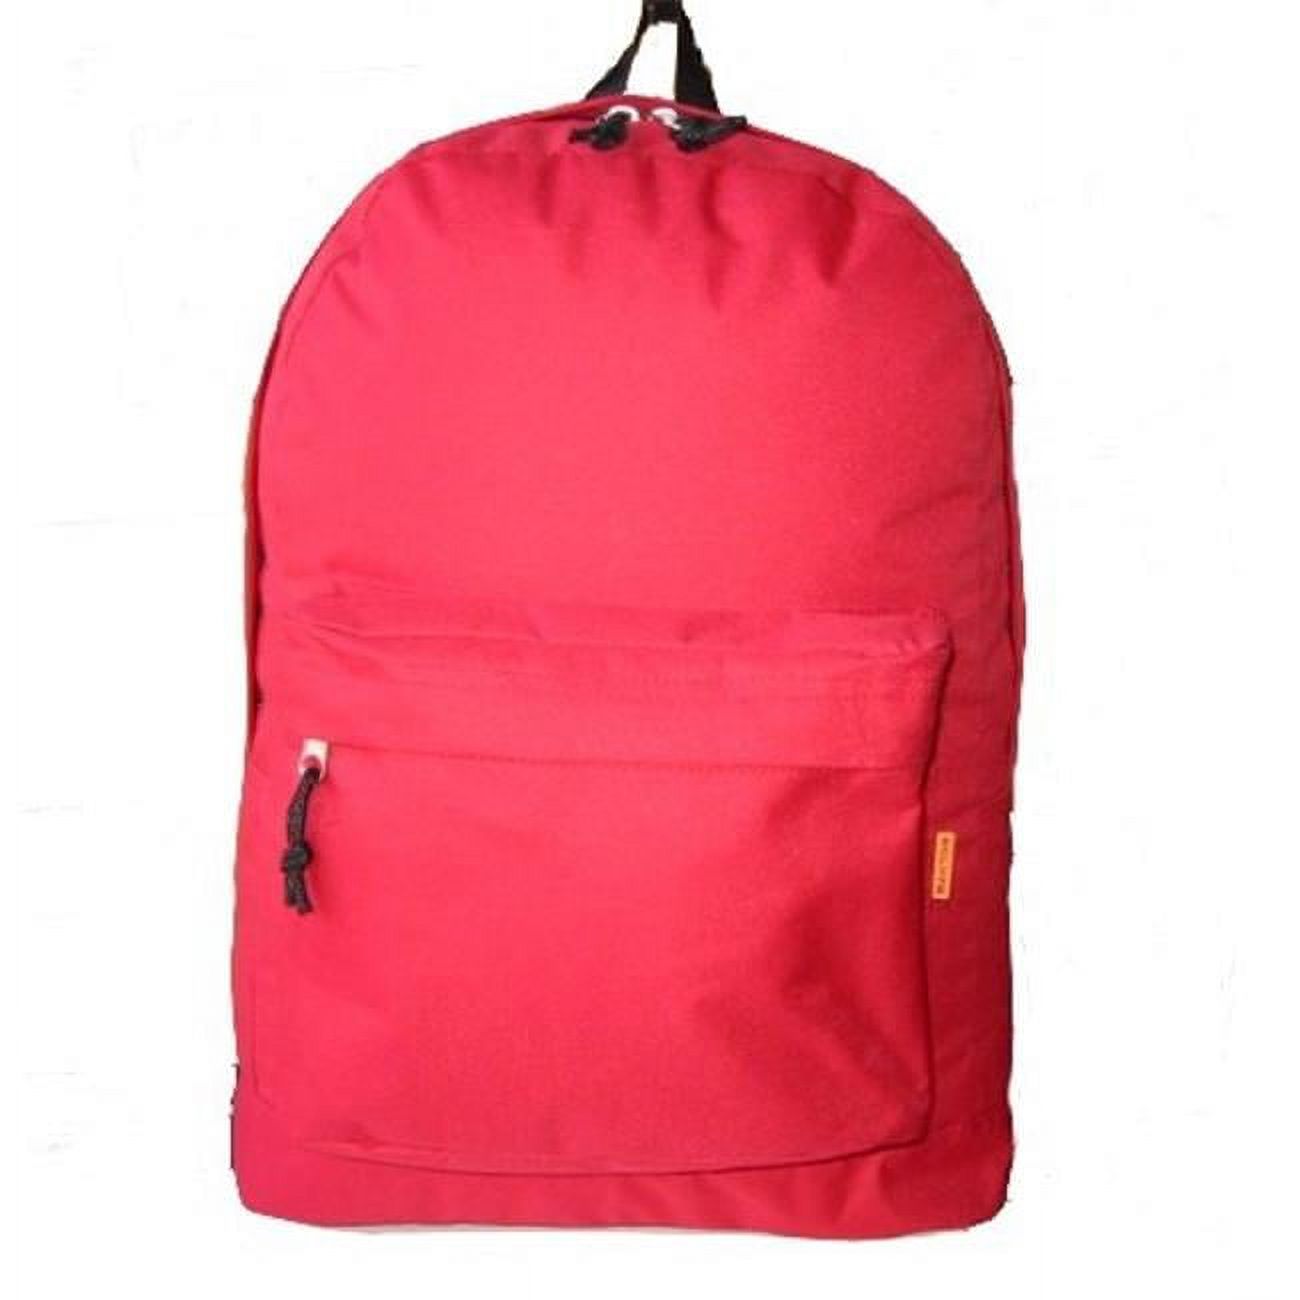 DDI 703148 16" Classic School Backpacks - Red Case of 40 - image 1 of 1